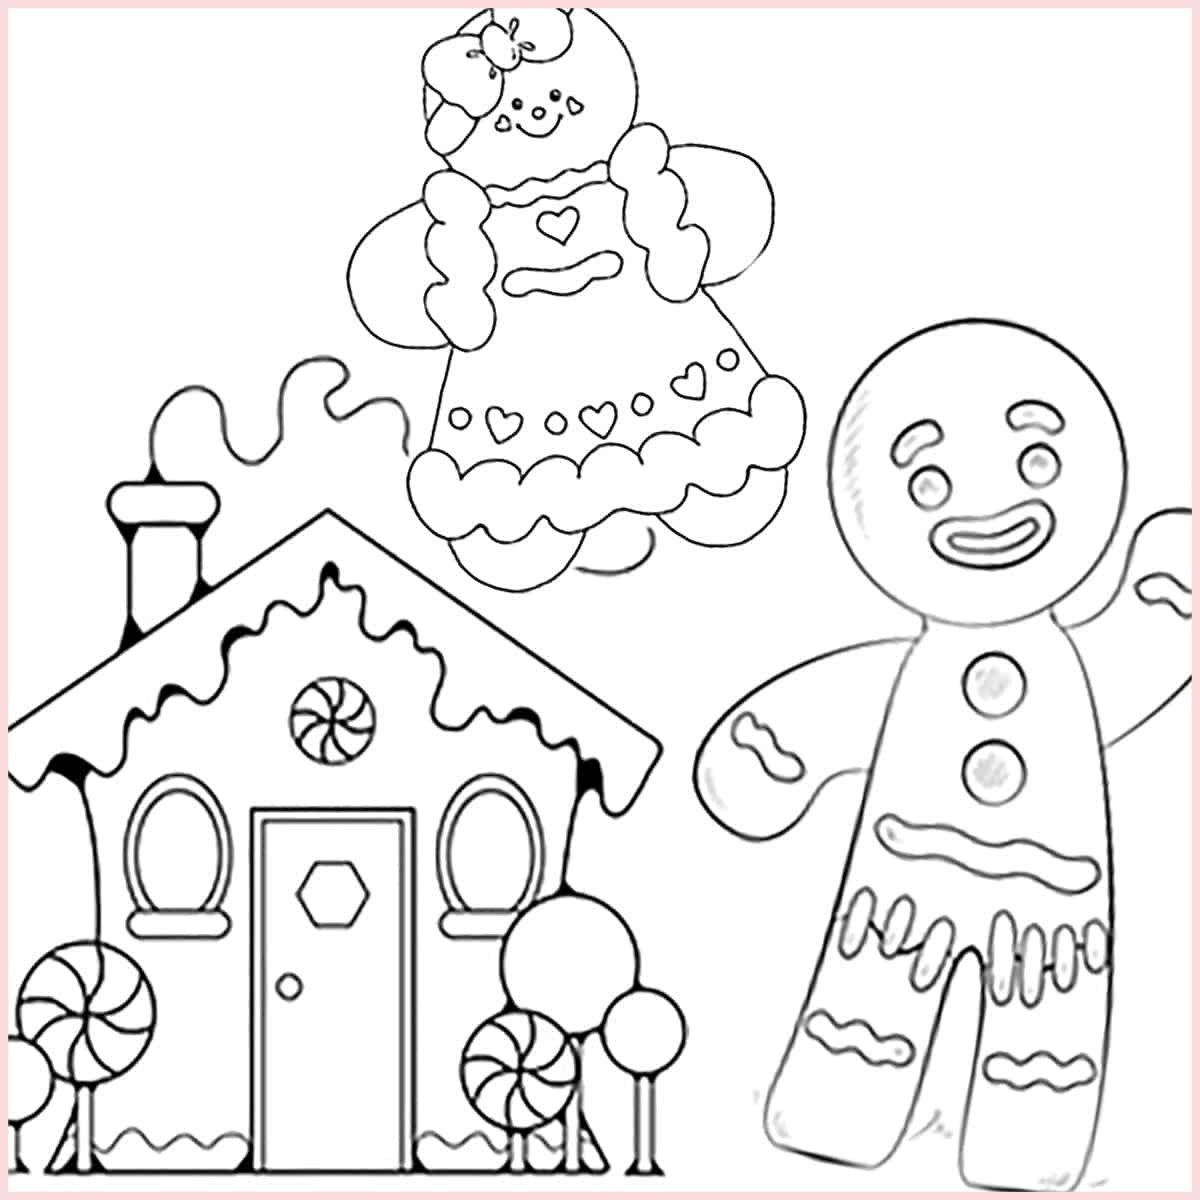 20 Gingerbread Man Coloring Pages Free to Print   Artsy Pretty ...